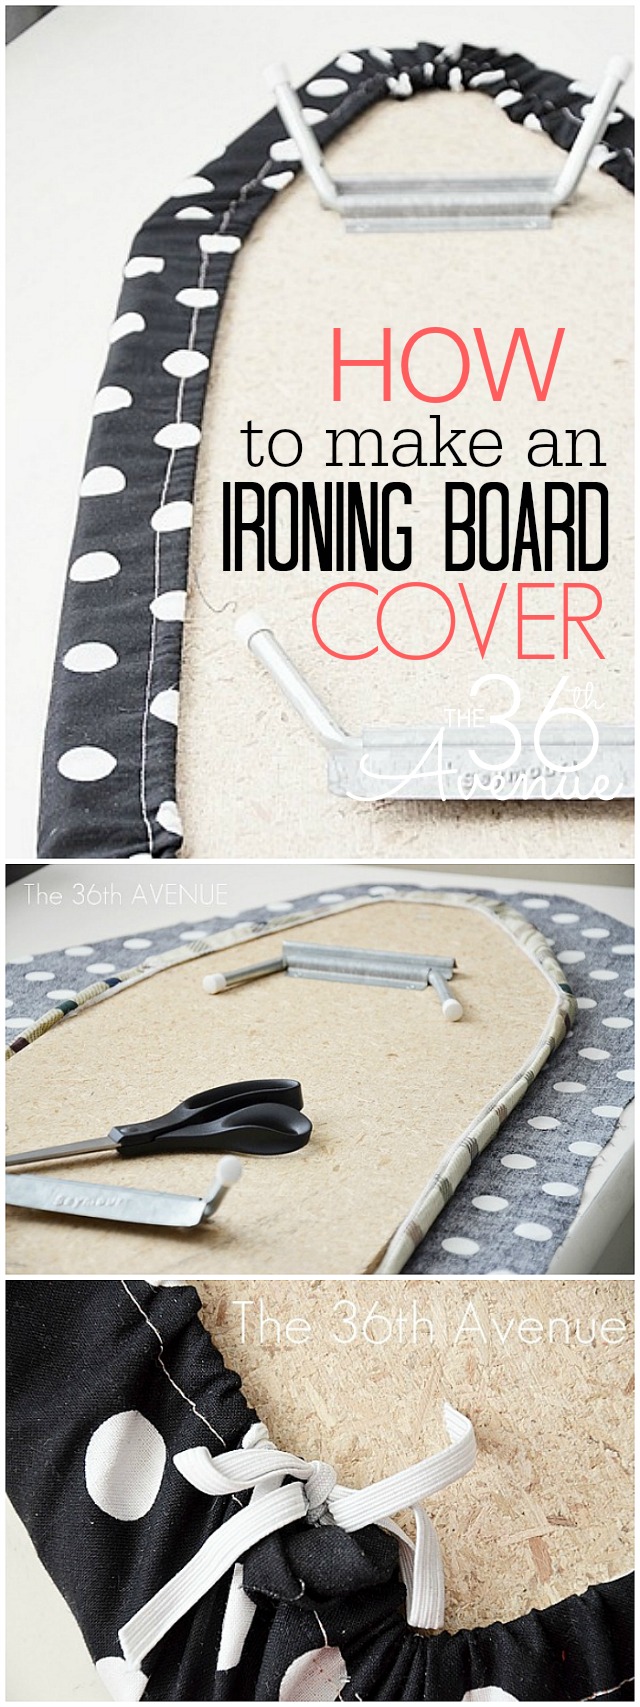 How to make an ironing board cover tutorial